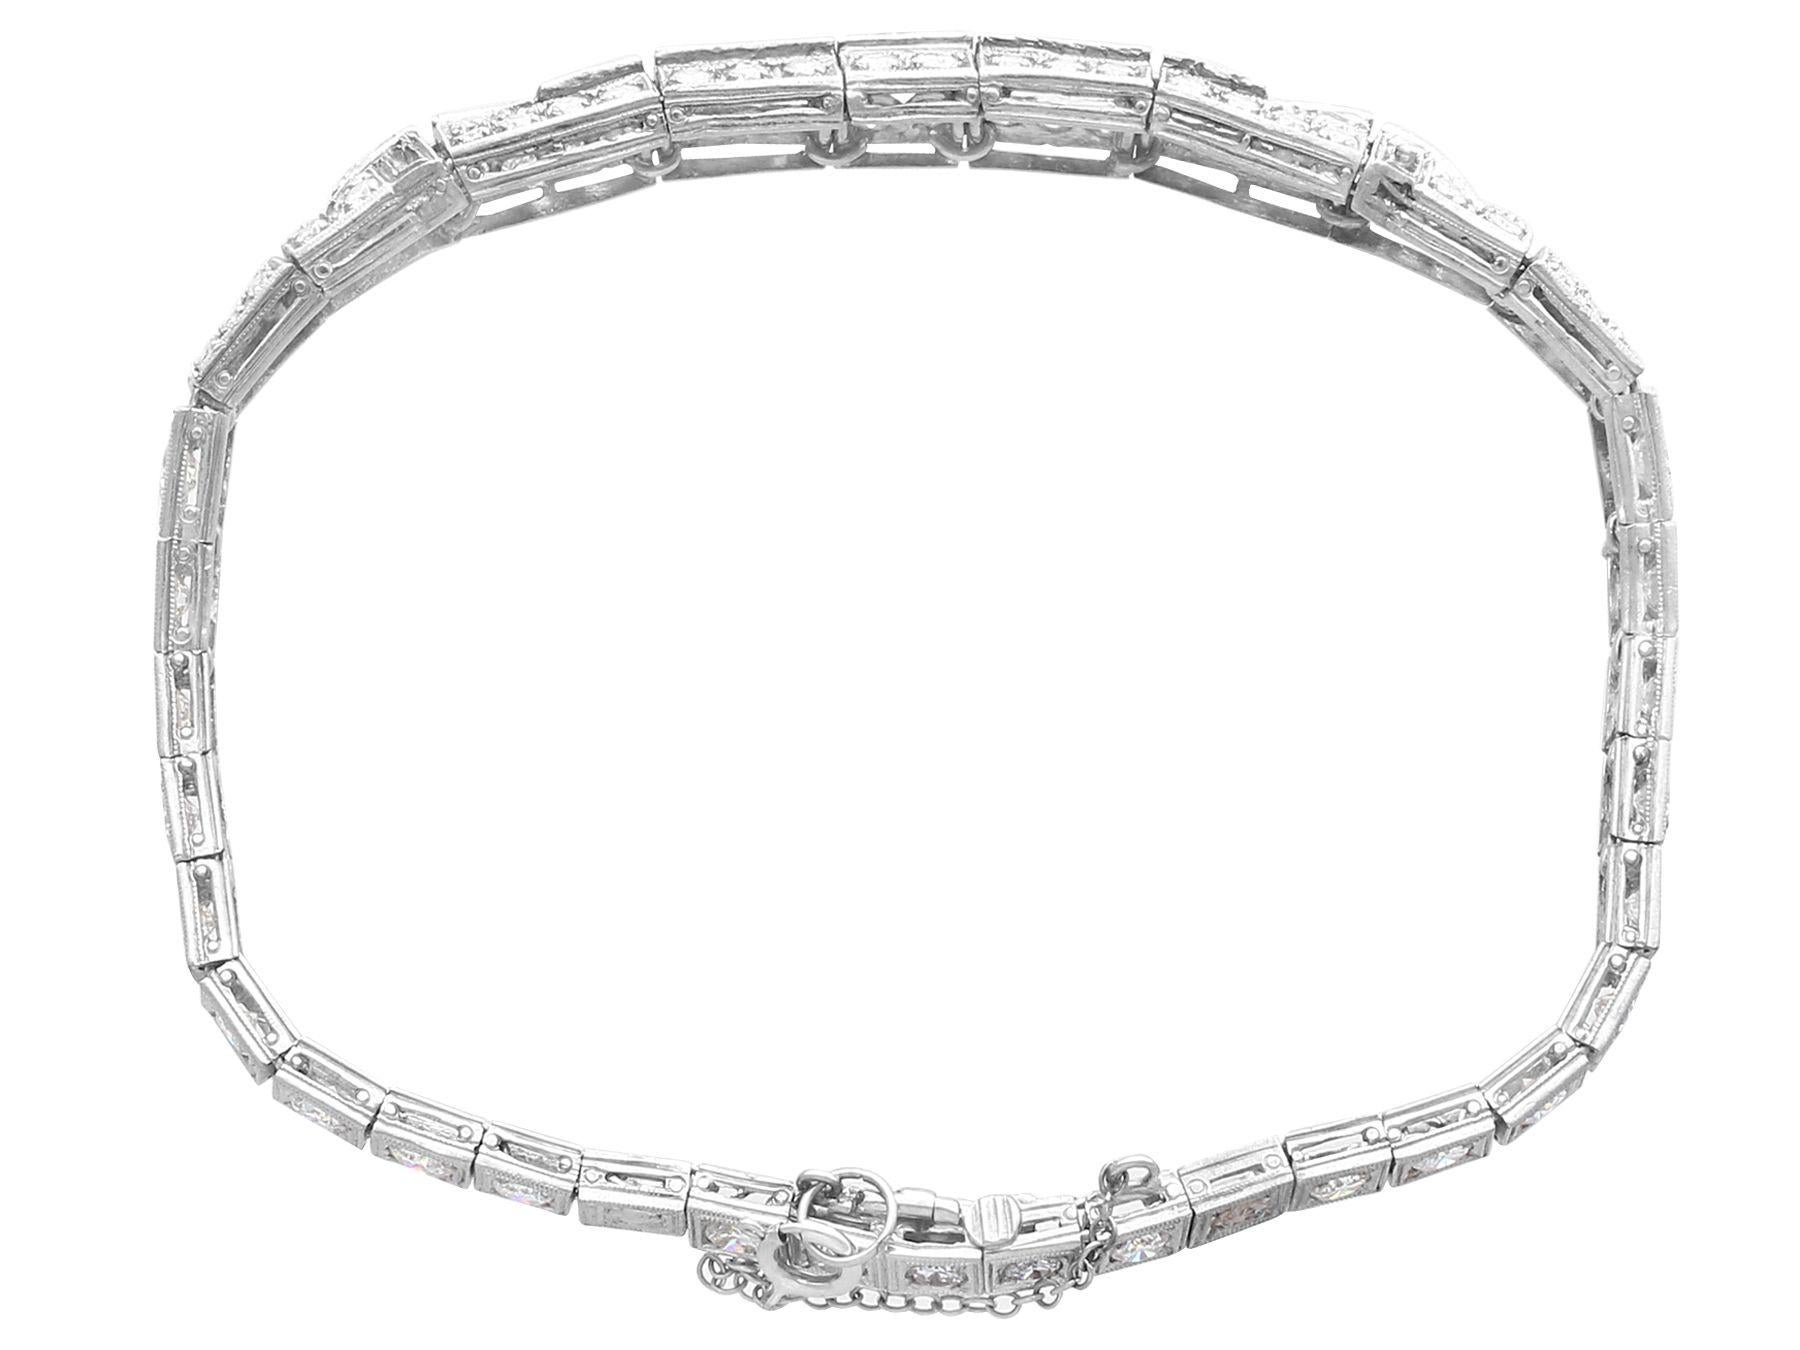 1930s Antique 4.46 Carat Diamond and Platinum Bracelet In Excellent Condition For Sale In Jesmond, Newcastle Upon Tyne